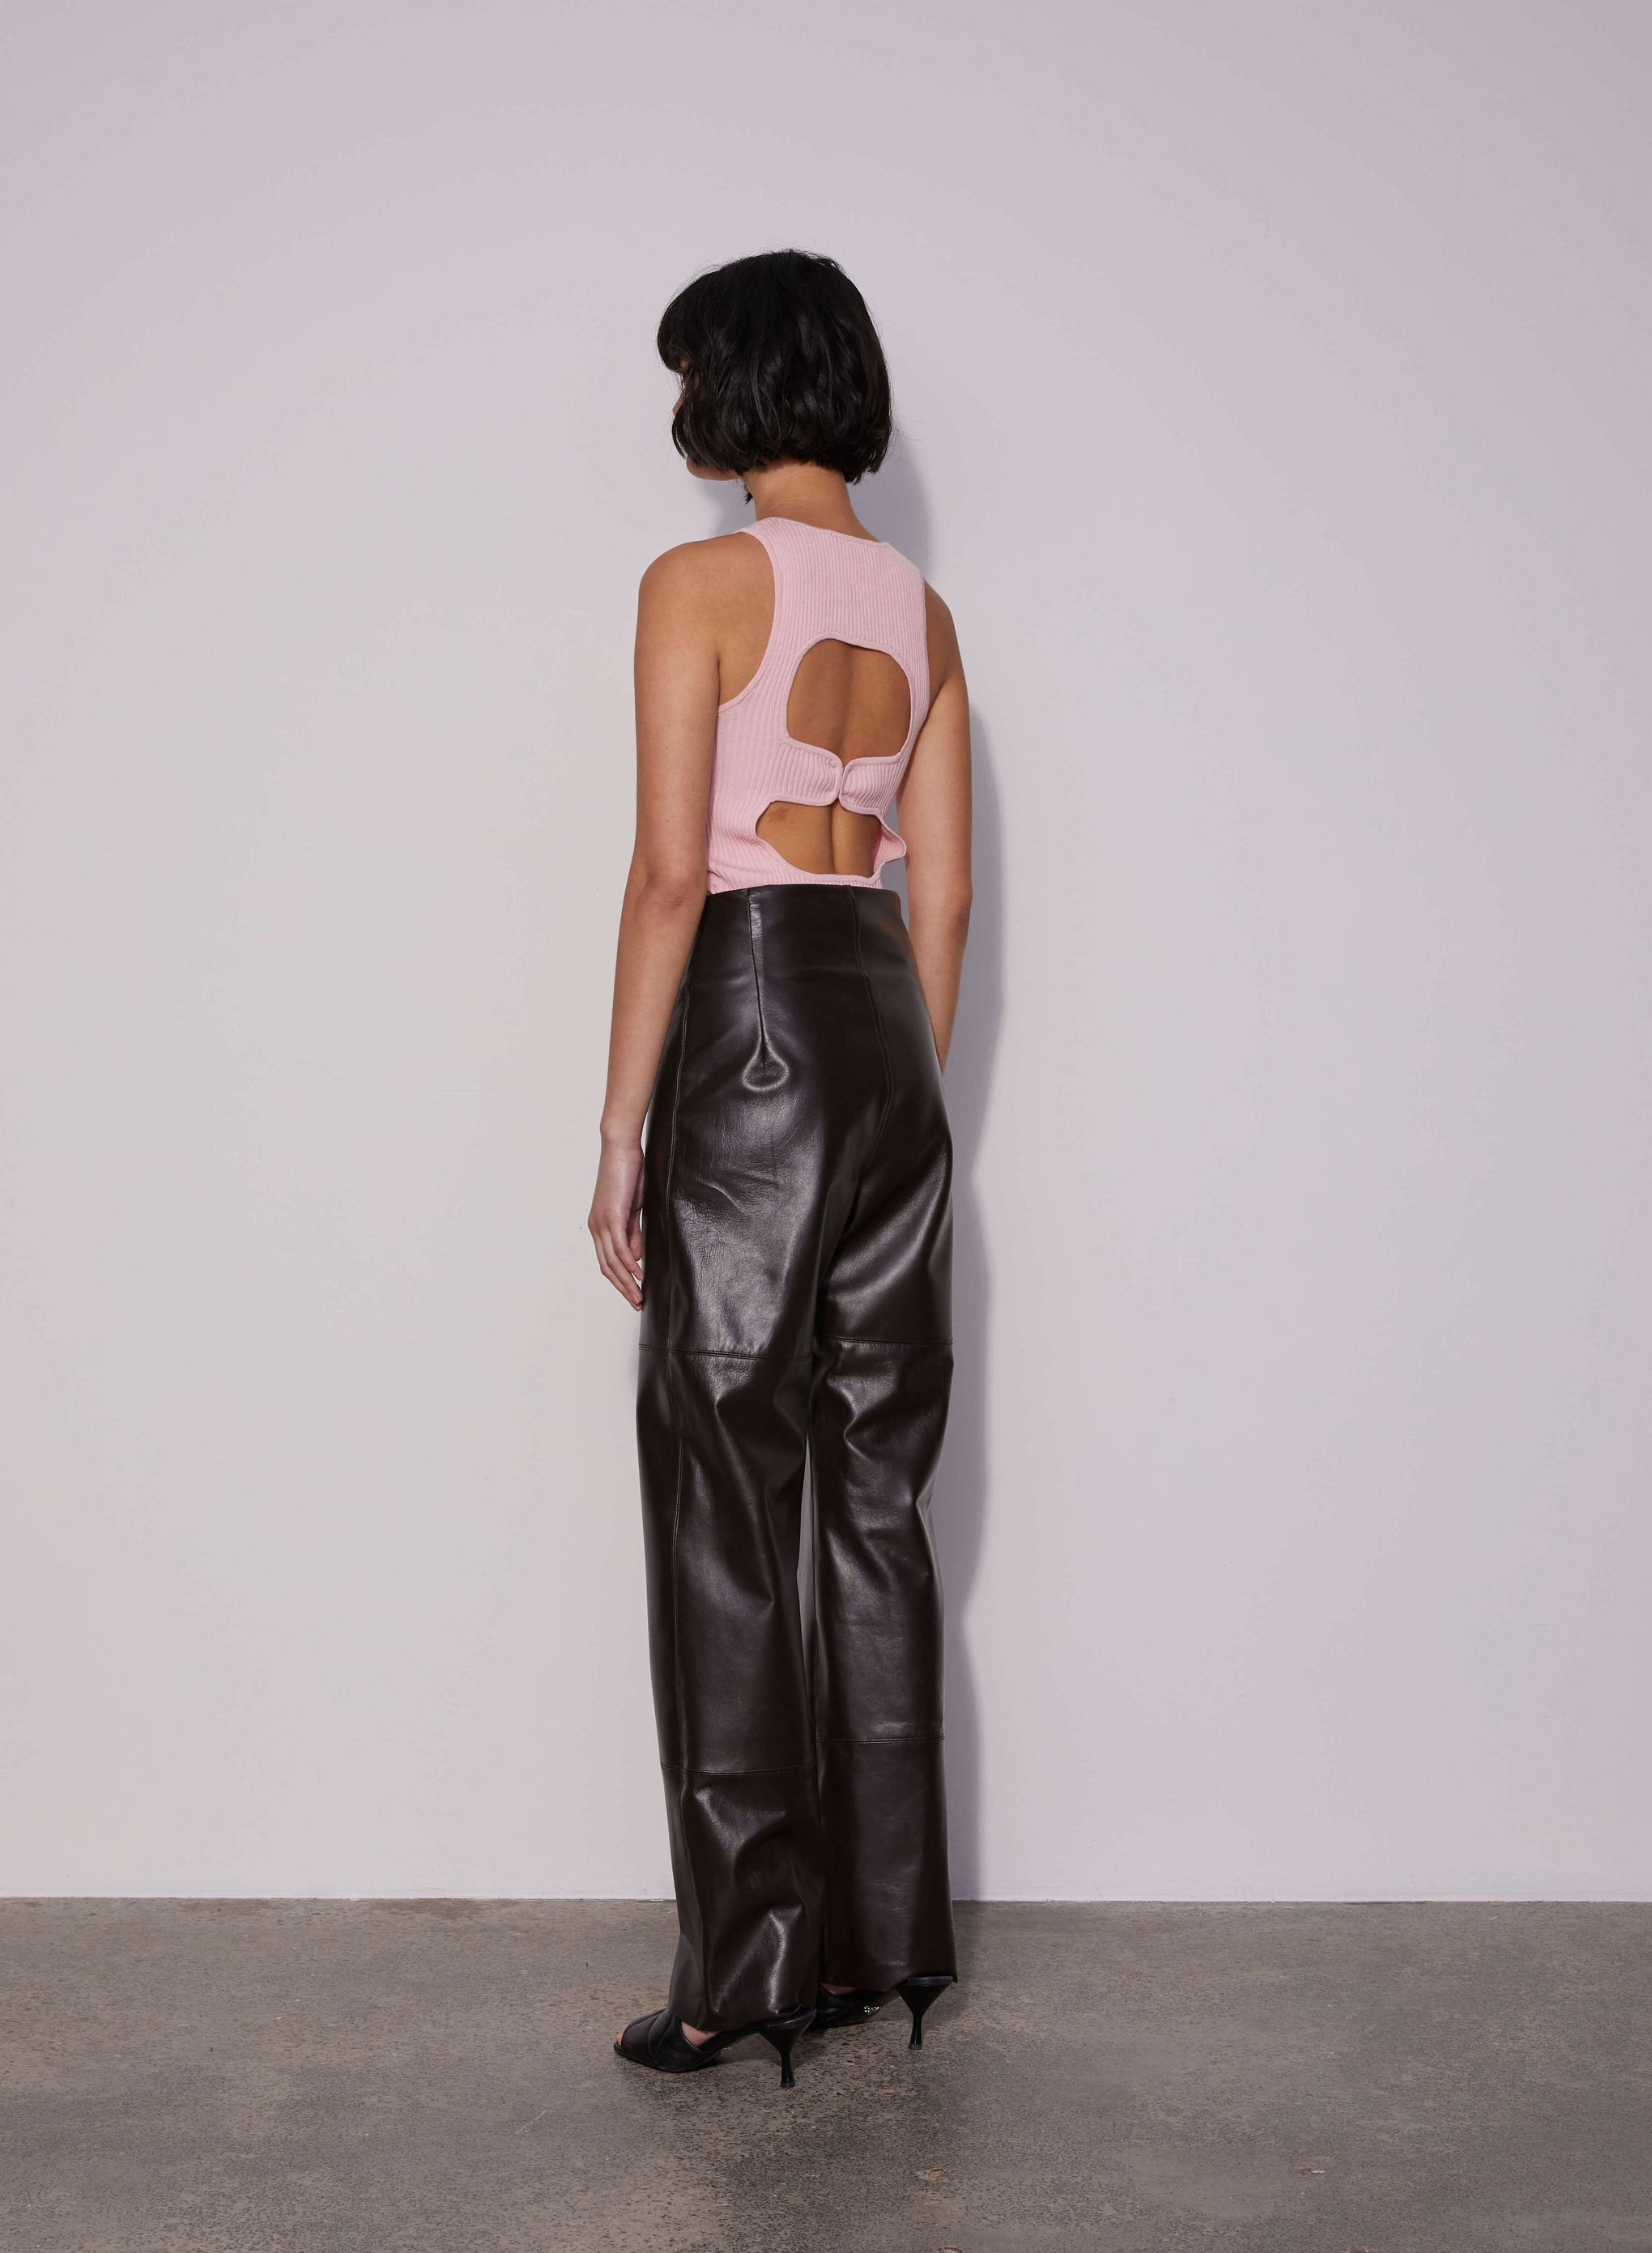 Wynn Hamlyn Ally Leather Trousers in Brown available at TNT The New Trend Australia. Free shipping on orders over $300 AUD.